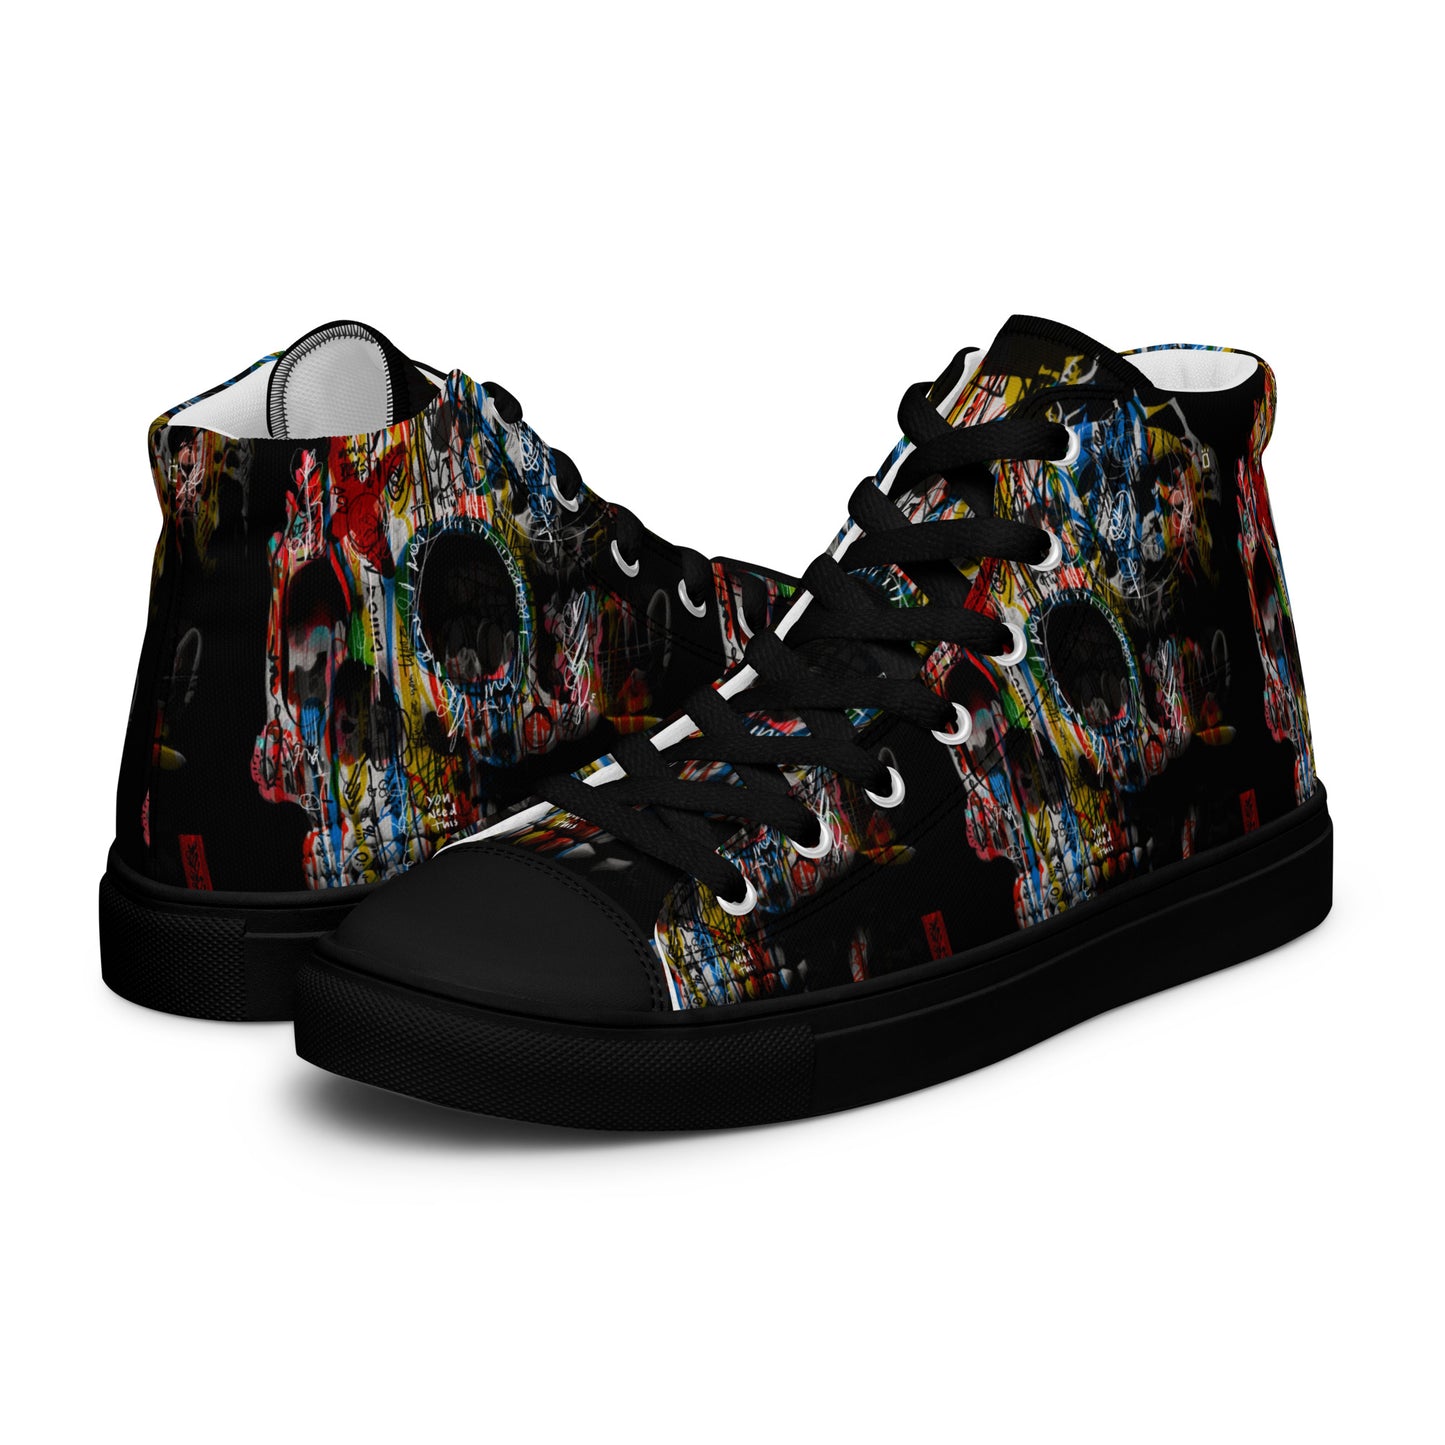 XRAY by SABET high top canvas shoes